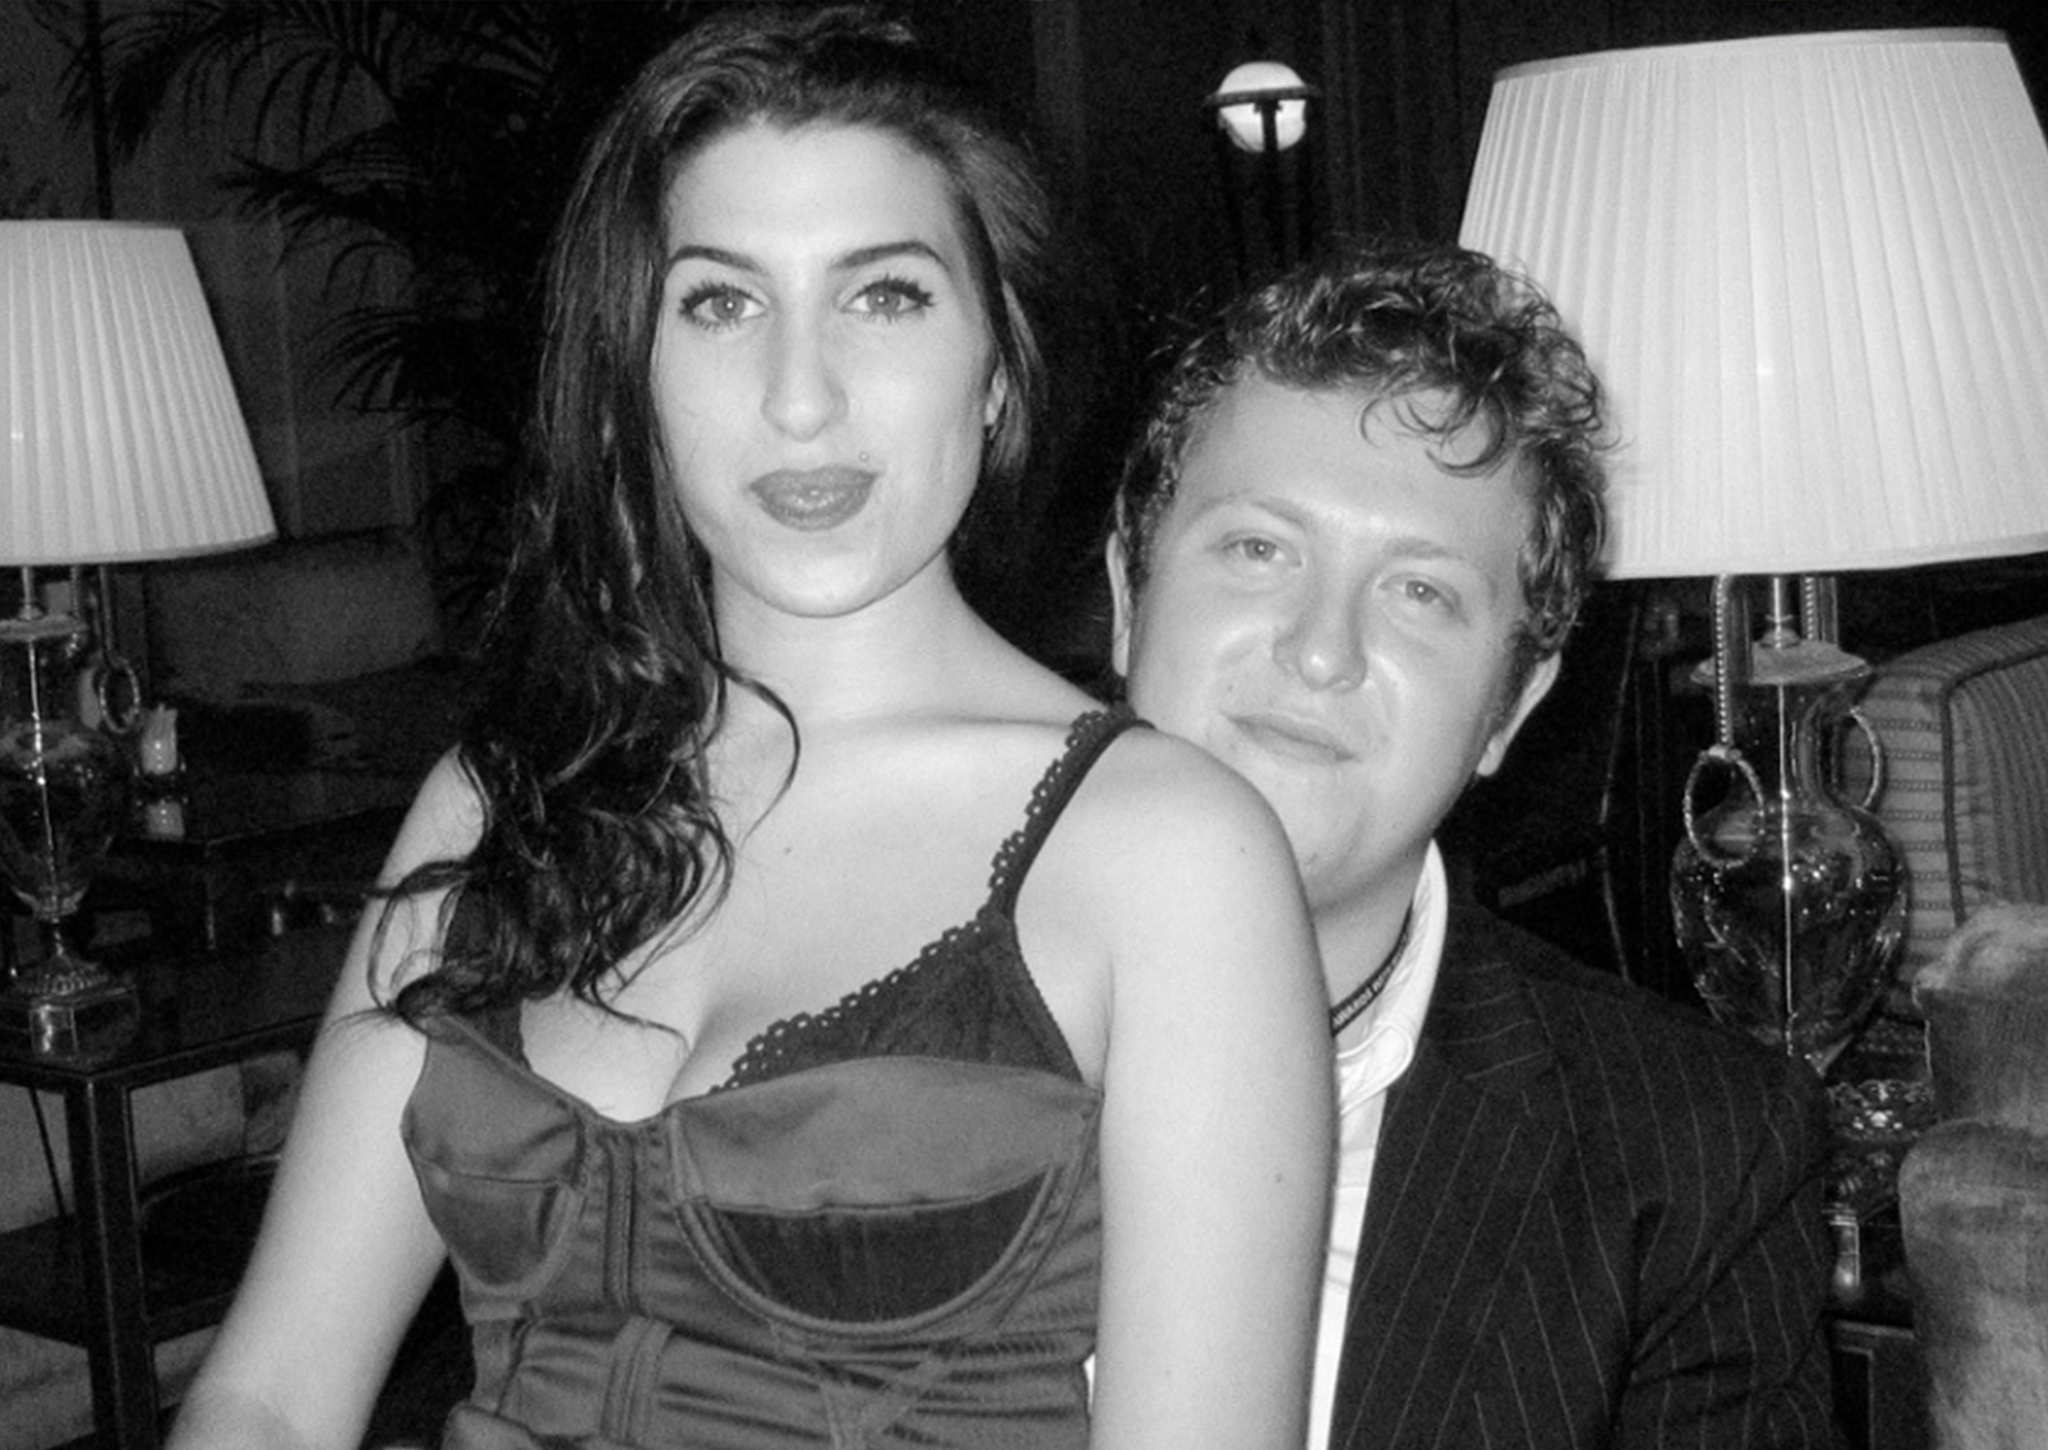 Amy Winehouse and the author in 2004